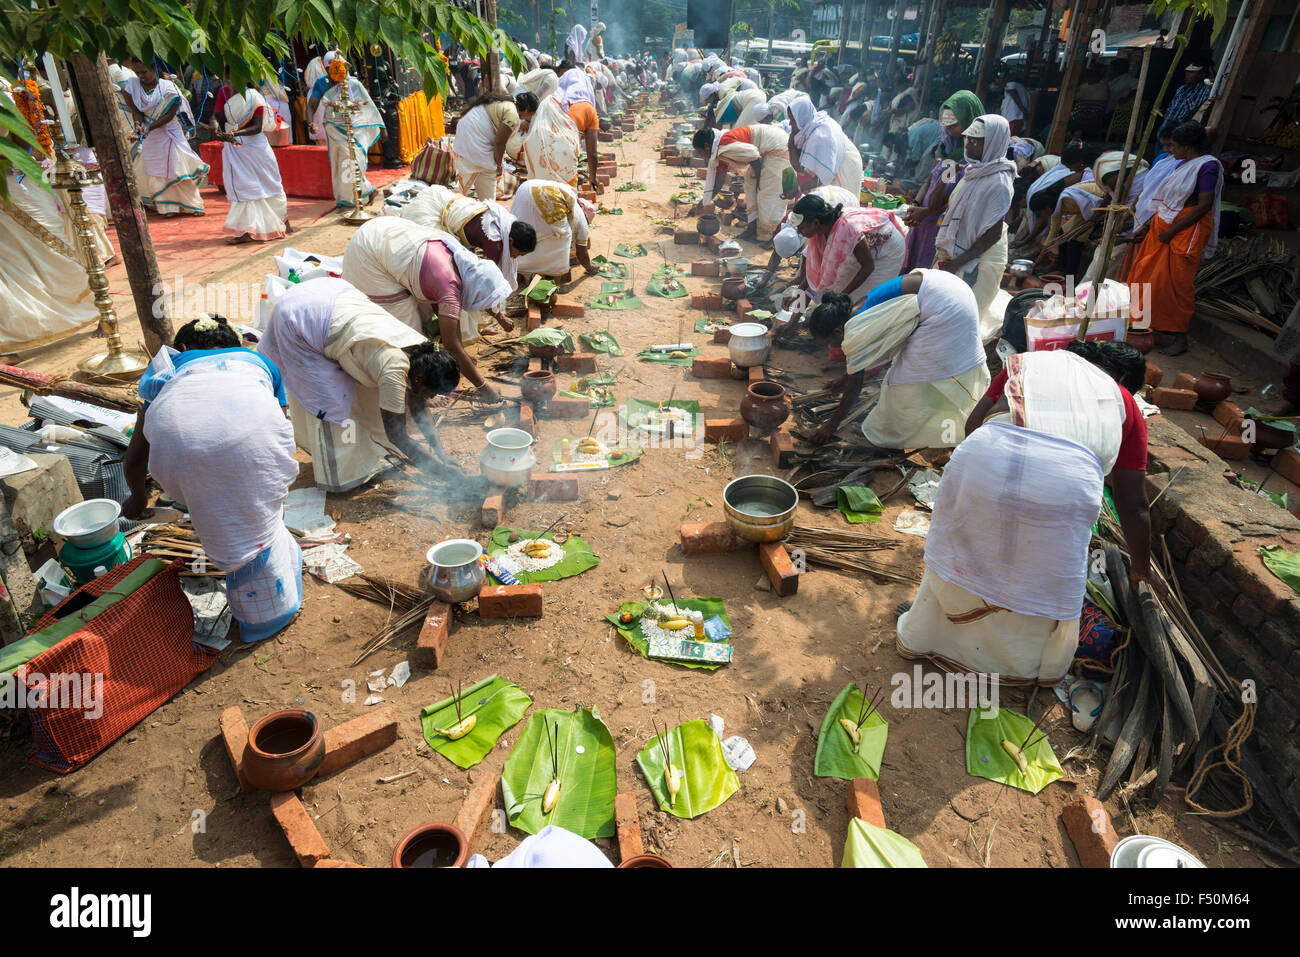 Many women, 3,5 millions in total, are cooking prasad on open fire in the busy streets during the Pongala festival Stock Photo